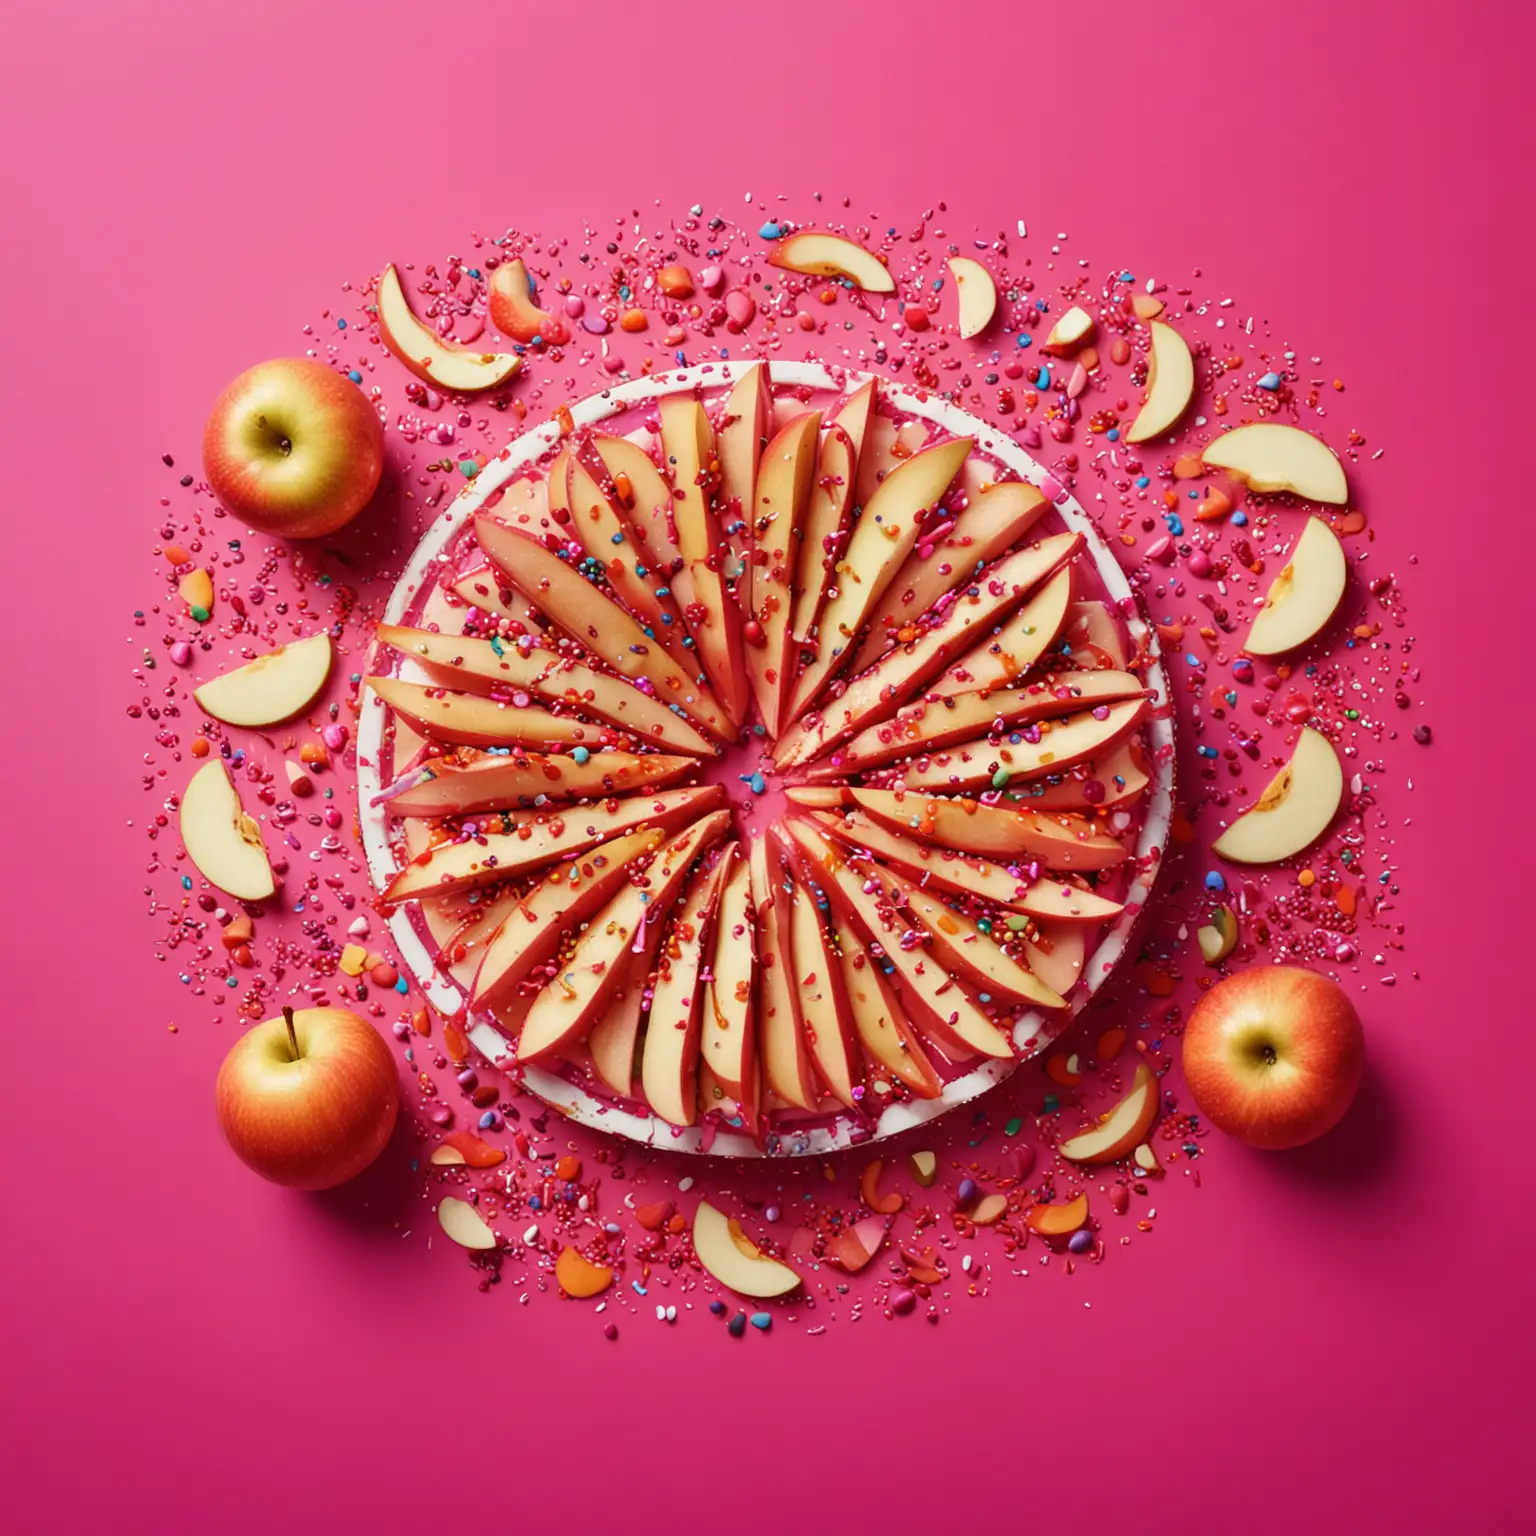 Juicy-Caramel-Apple-Slices-with-Sprinkles-on-Fuchsia-Background